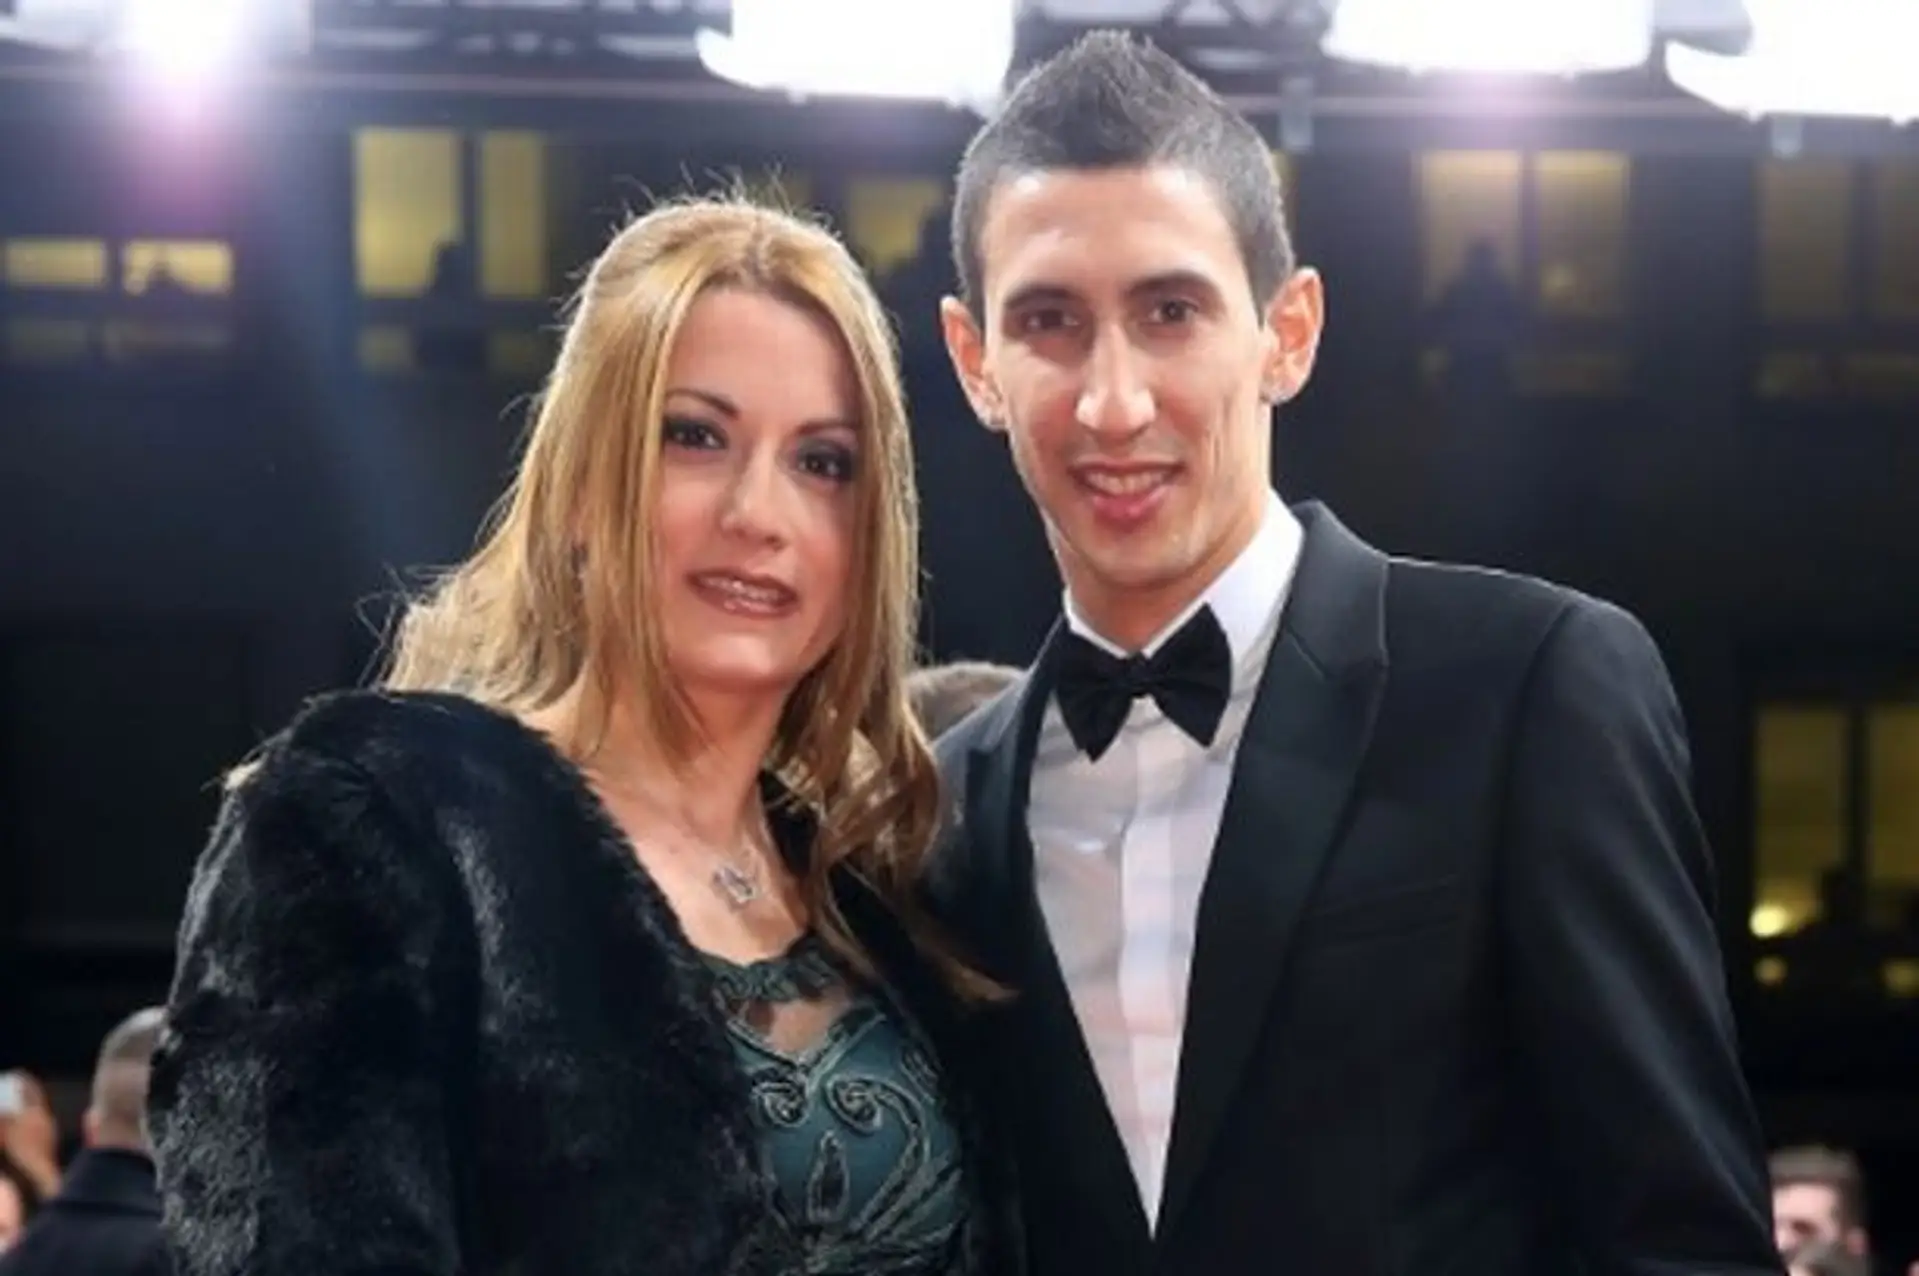 Why Di Maria's wife's comments are simply disgusting and inhuman